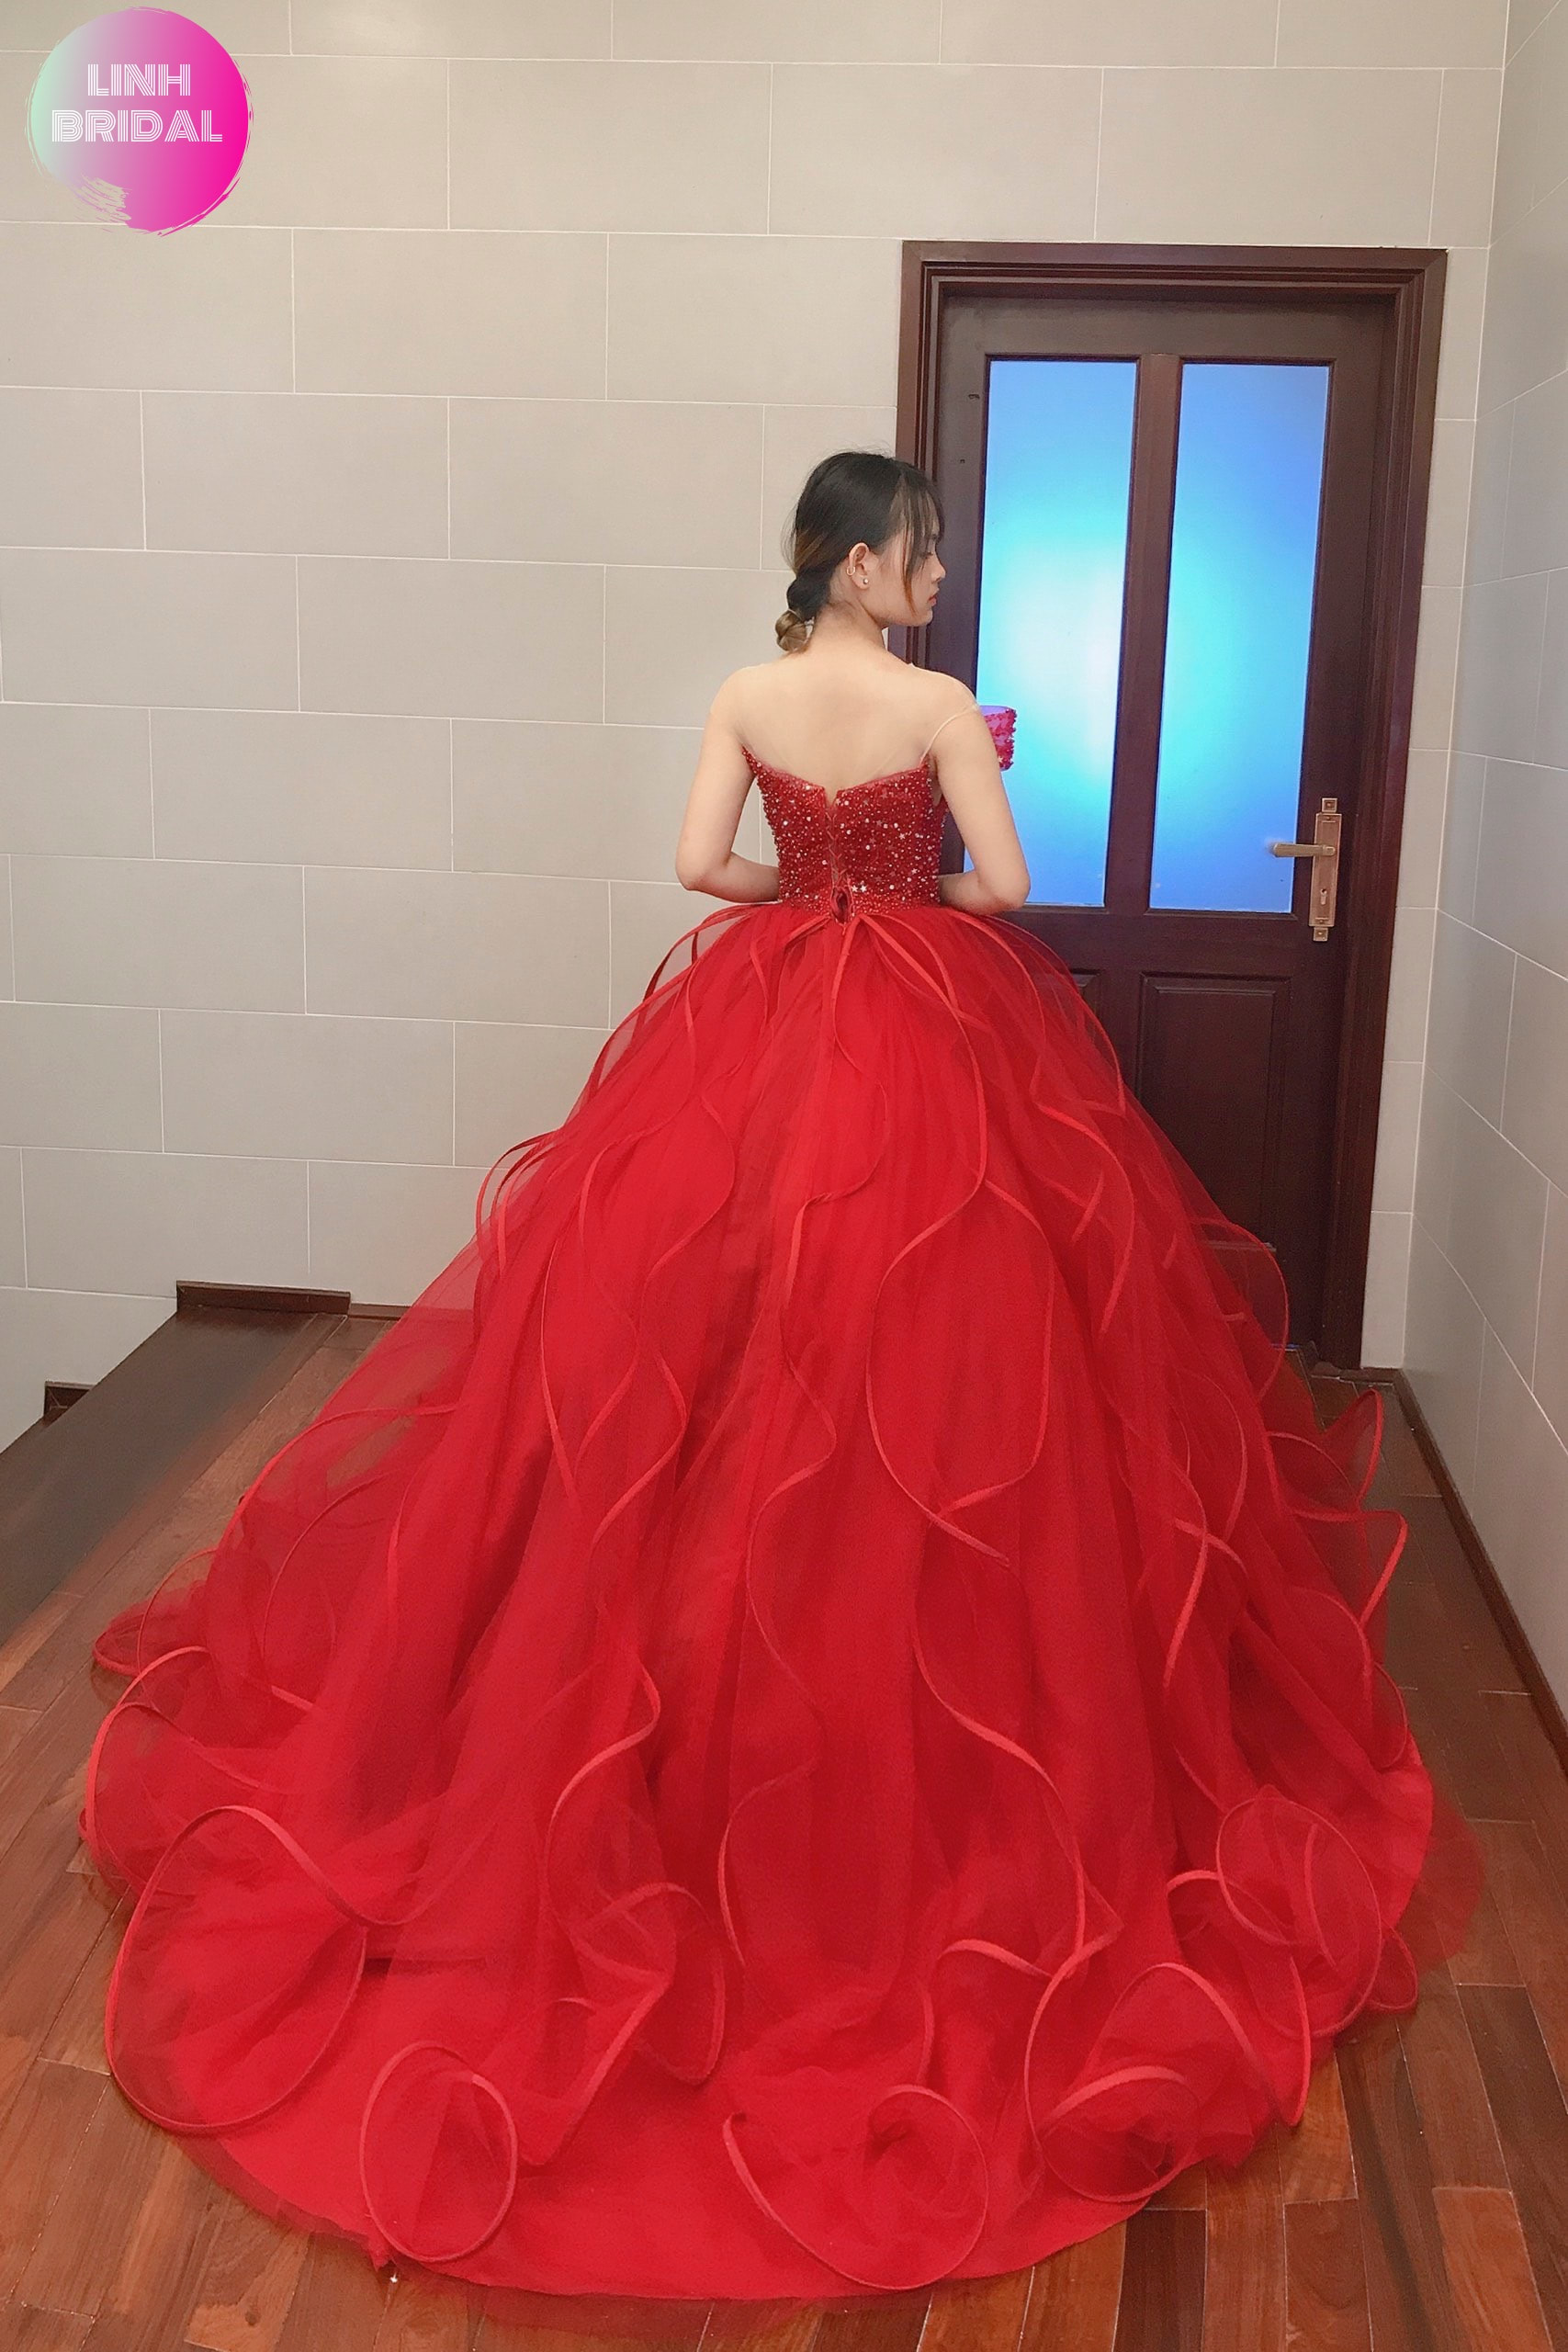 Flounce red princess tulle ball gown ...